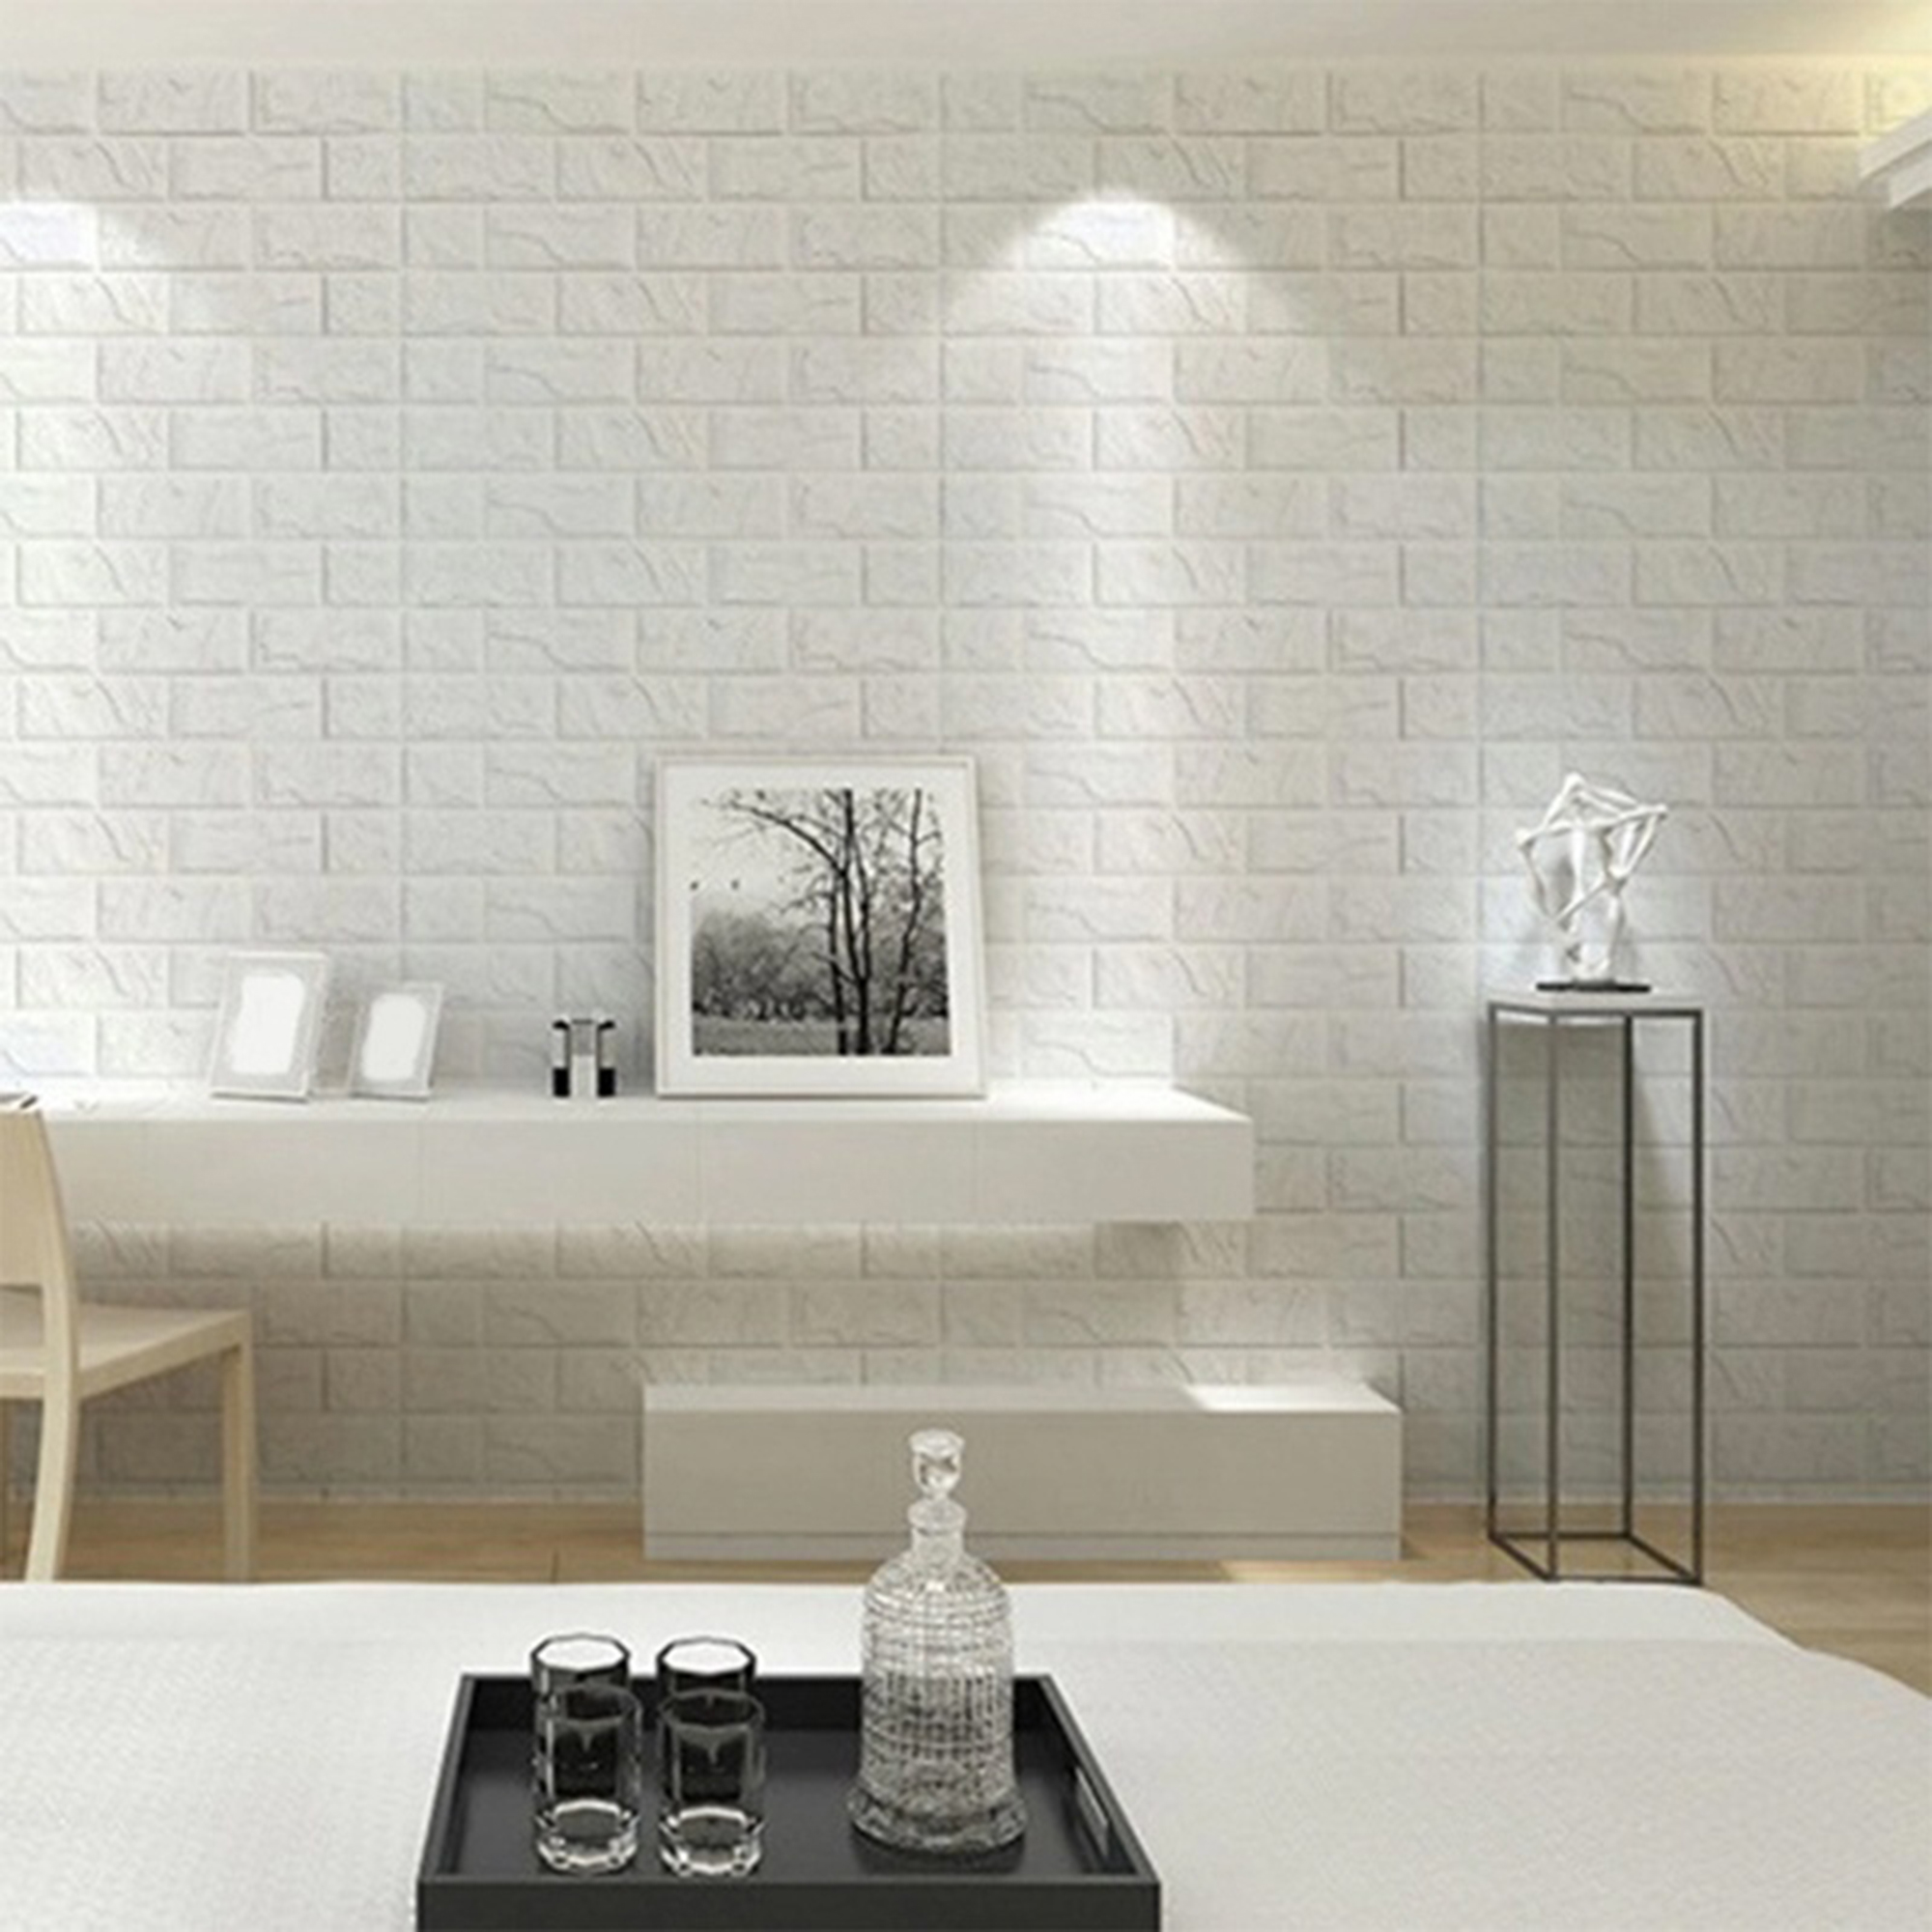 White Foam Brick 3D Wall Panels Peel and Stick Wallpaper Adhesive Textured Brick Tiles Waterproof Brick Pattern Wall Stickers Bedroom Living Room Background Decorative for Home Decor - image 4 of 7